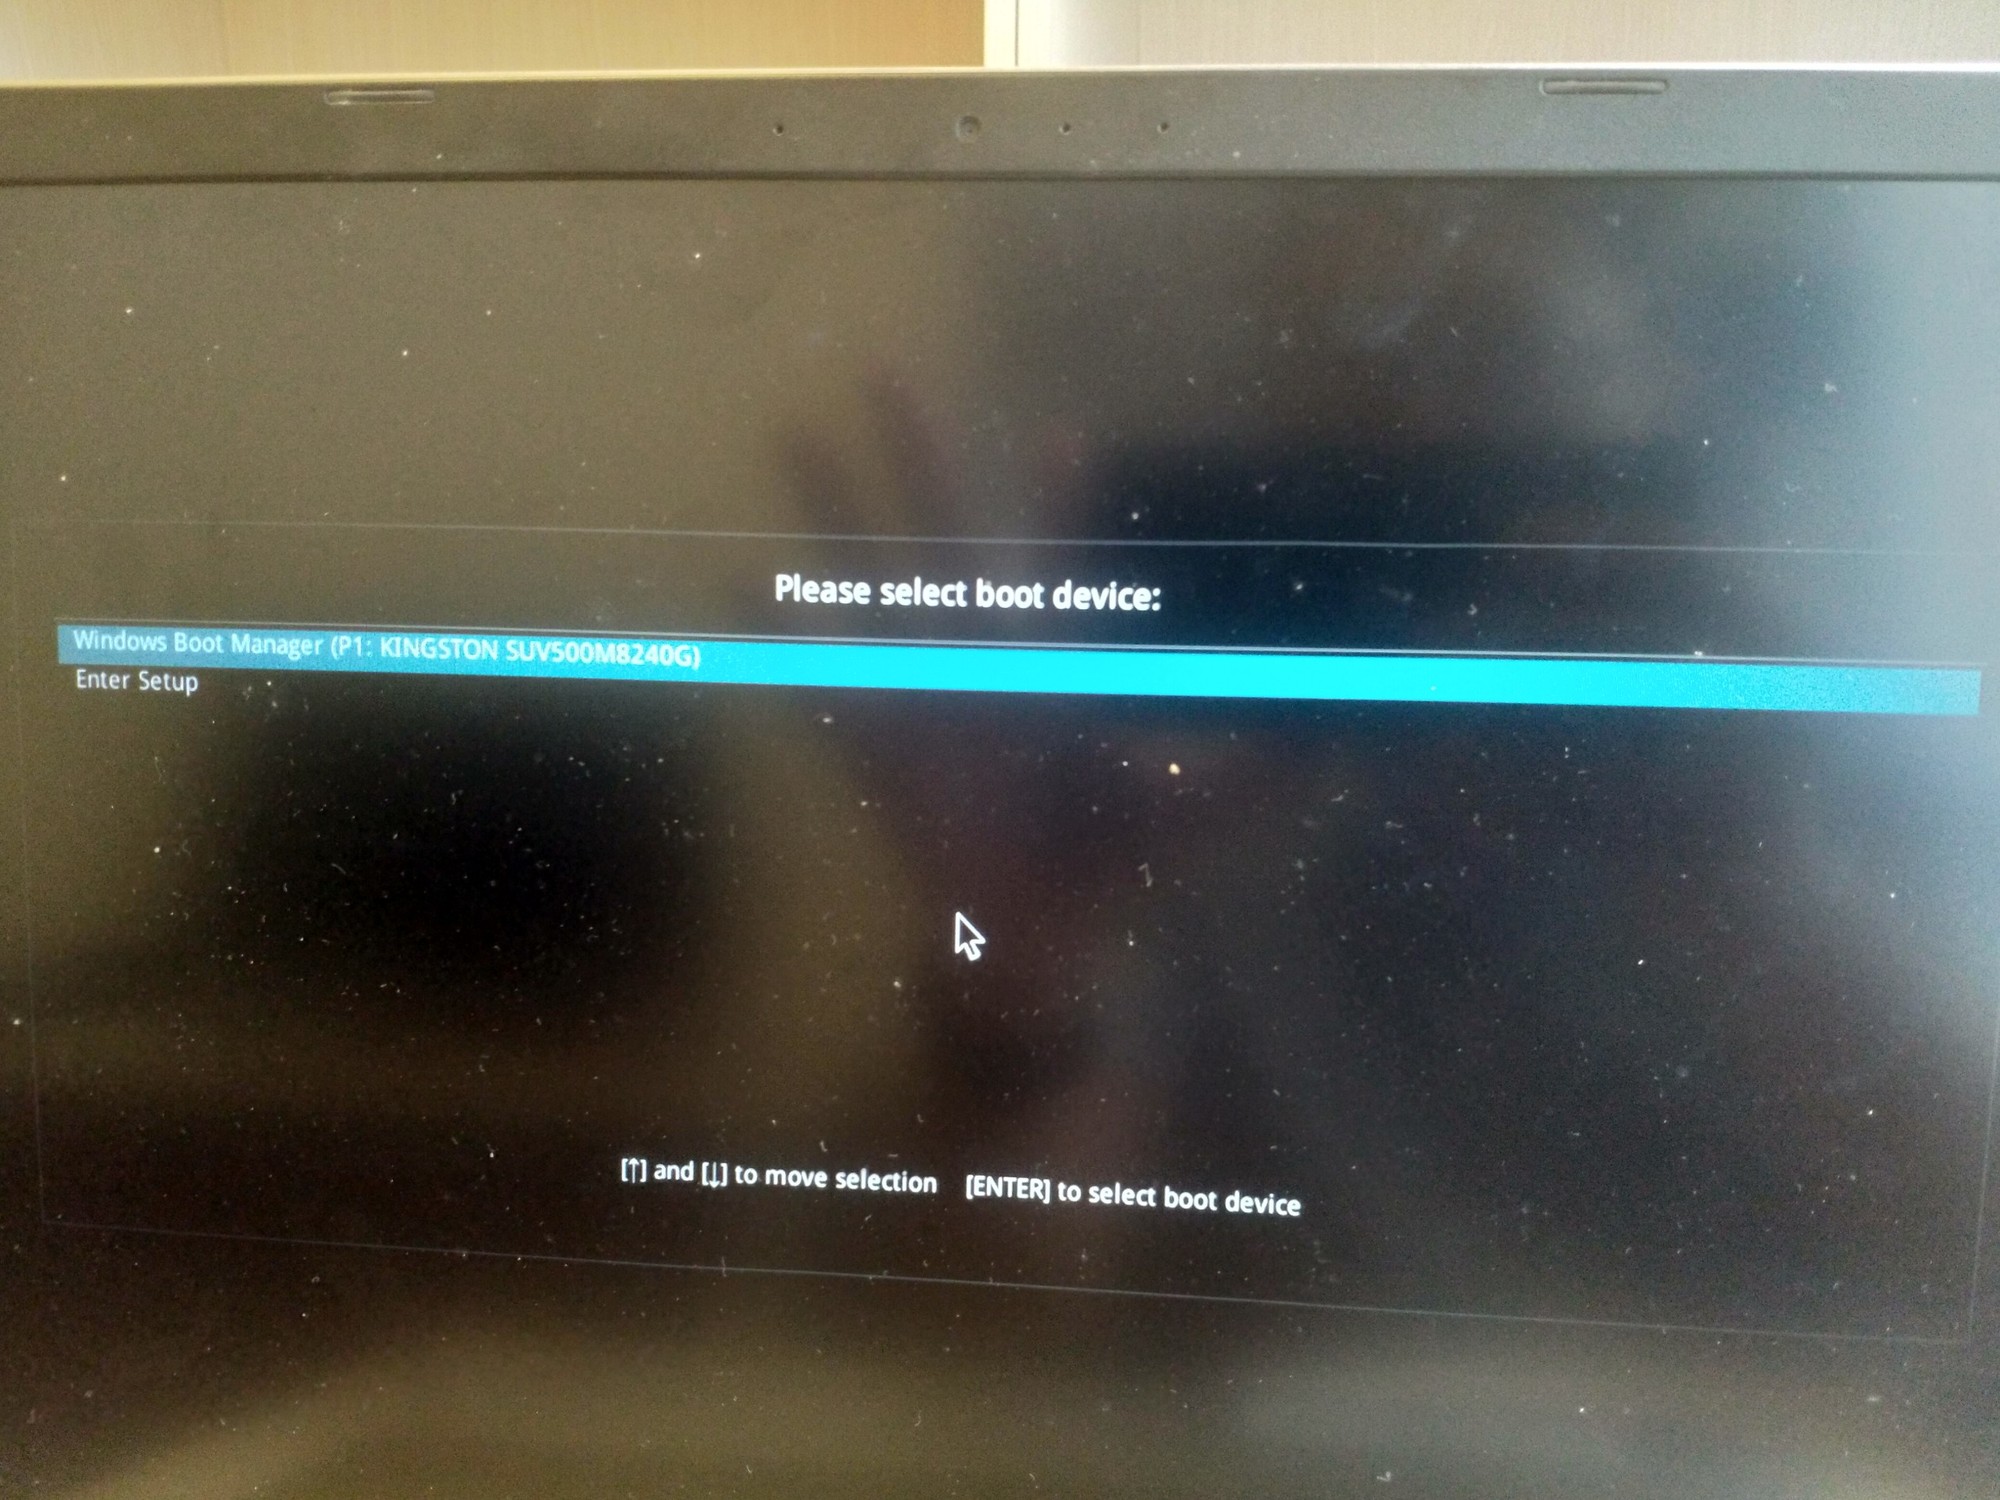 Remove Select boot device screen